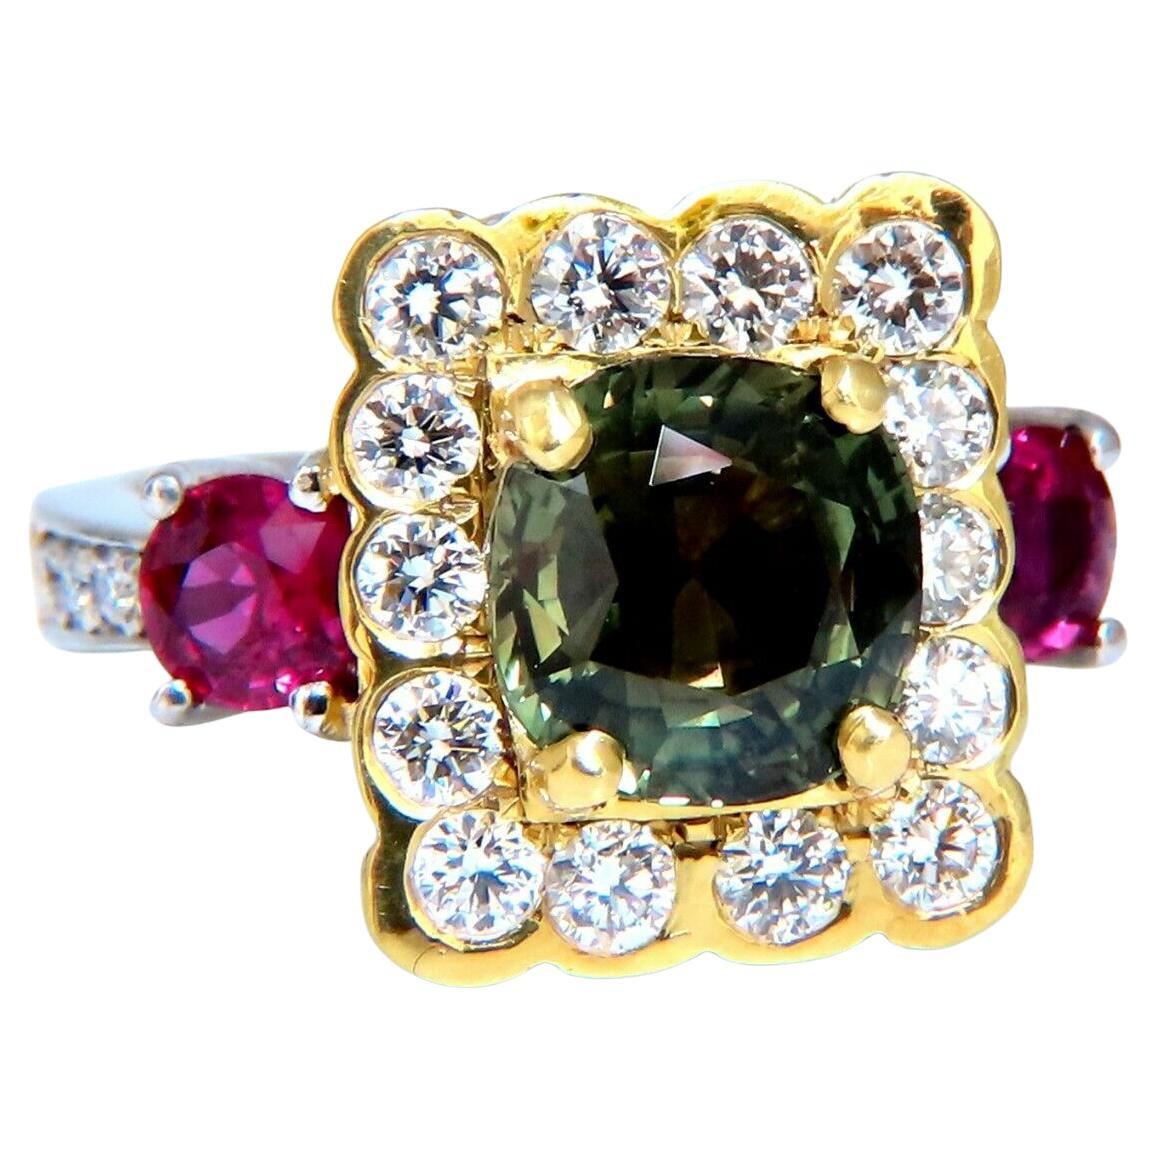 GIA Certified 3.48 Carat Natural Color Change Alexandrite Ruby Diamond Ring For Sale